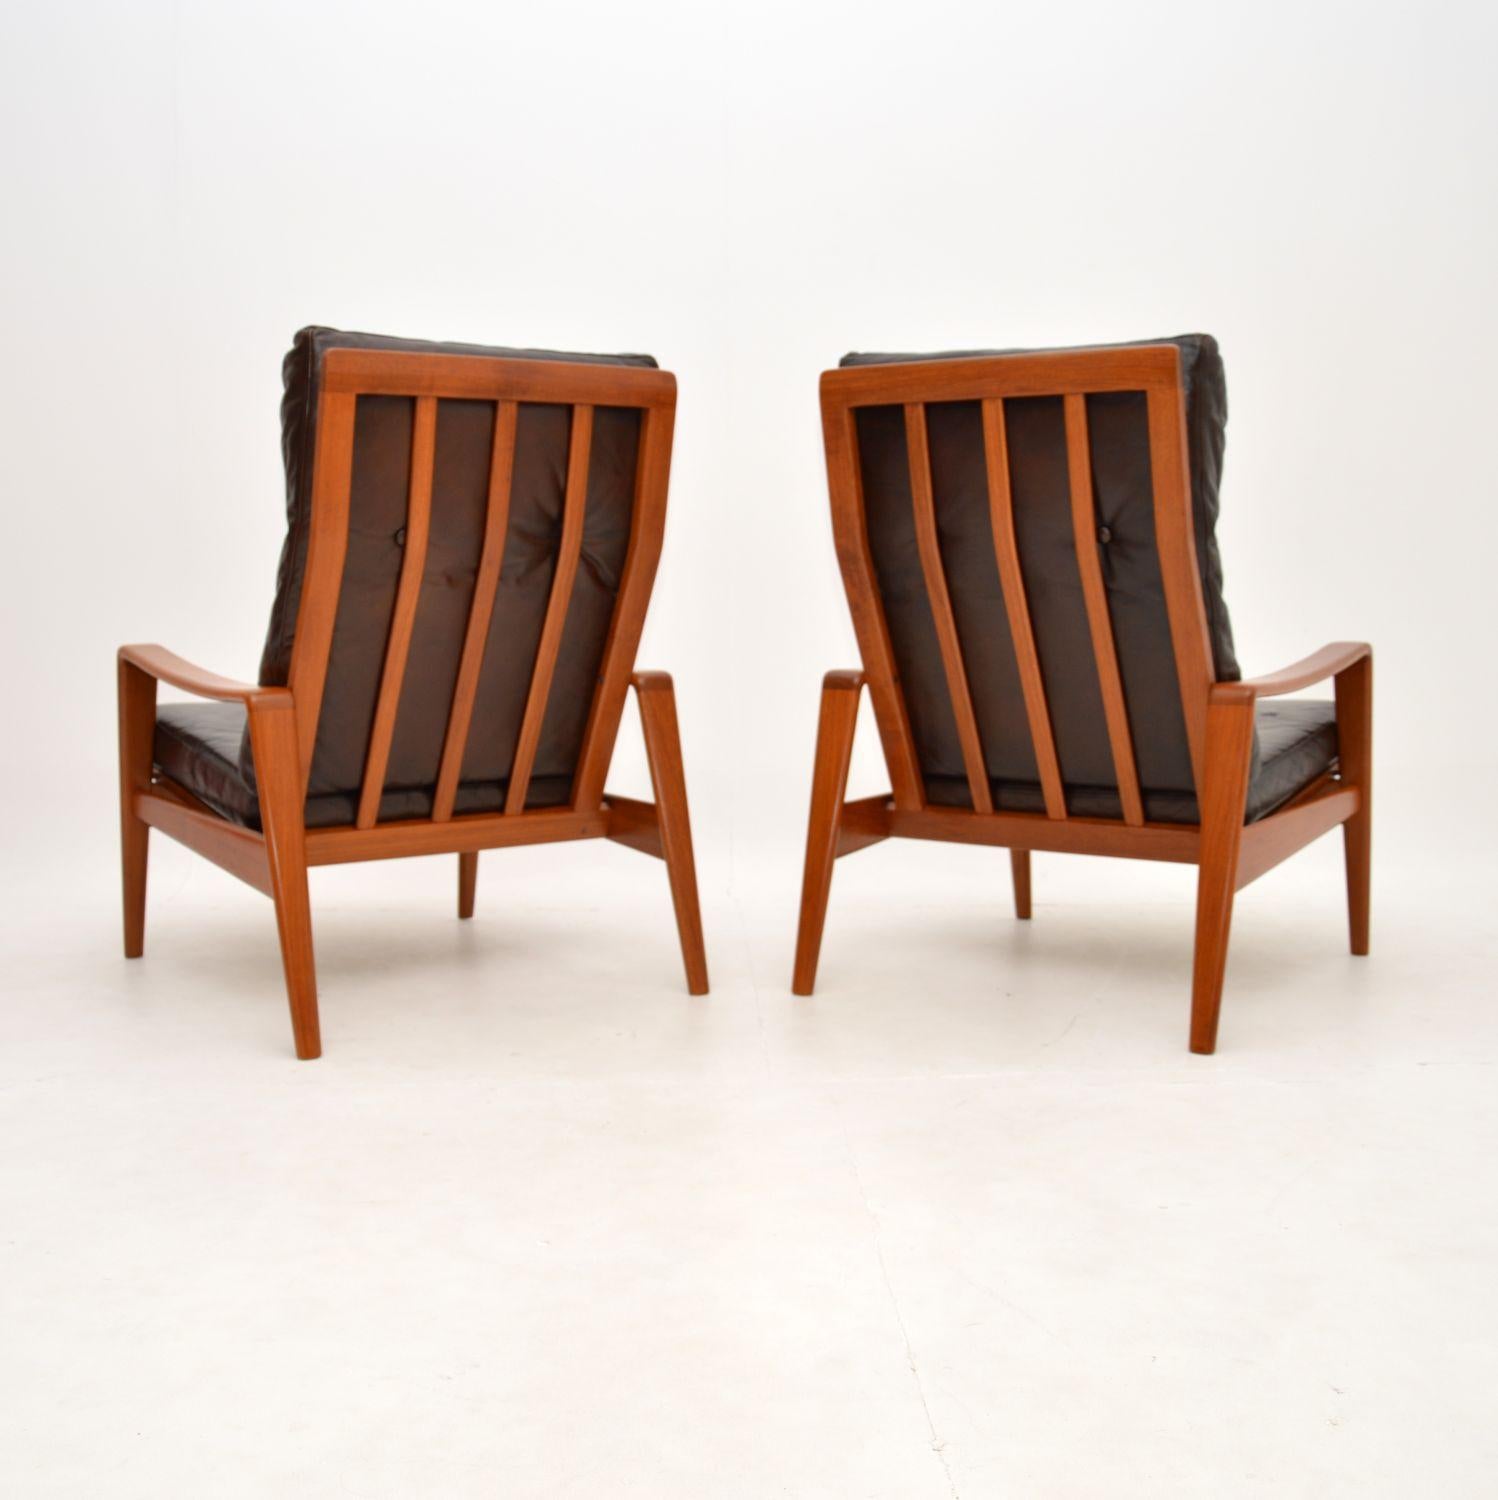 Pair of Danish Vintage Teak and Leather Armchairs by Arne Wahl Iversen In Good Condition For Sale In London, GB